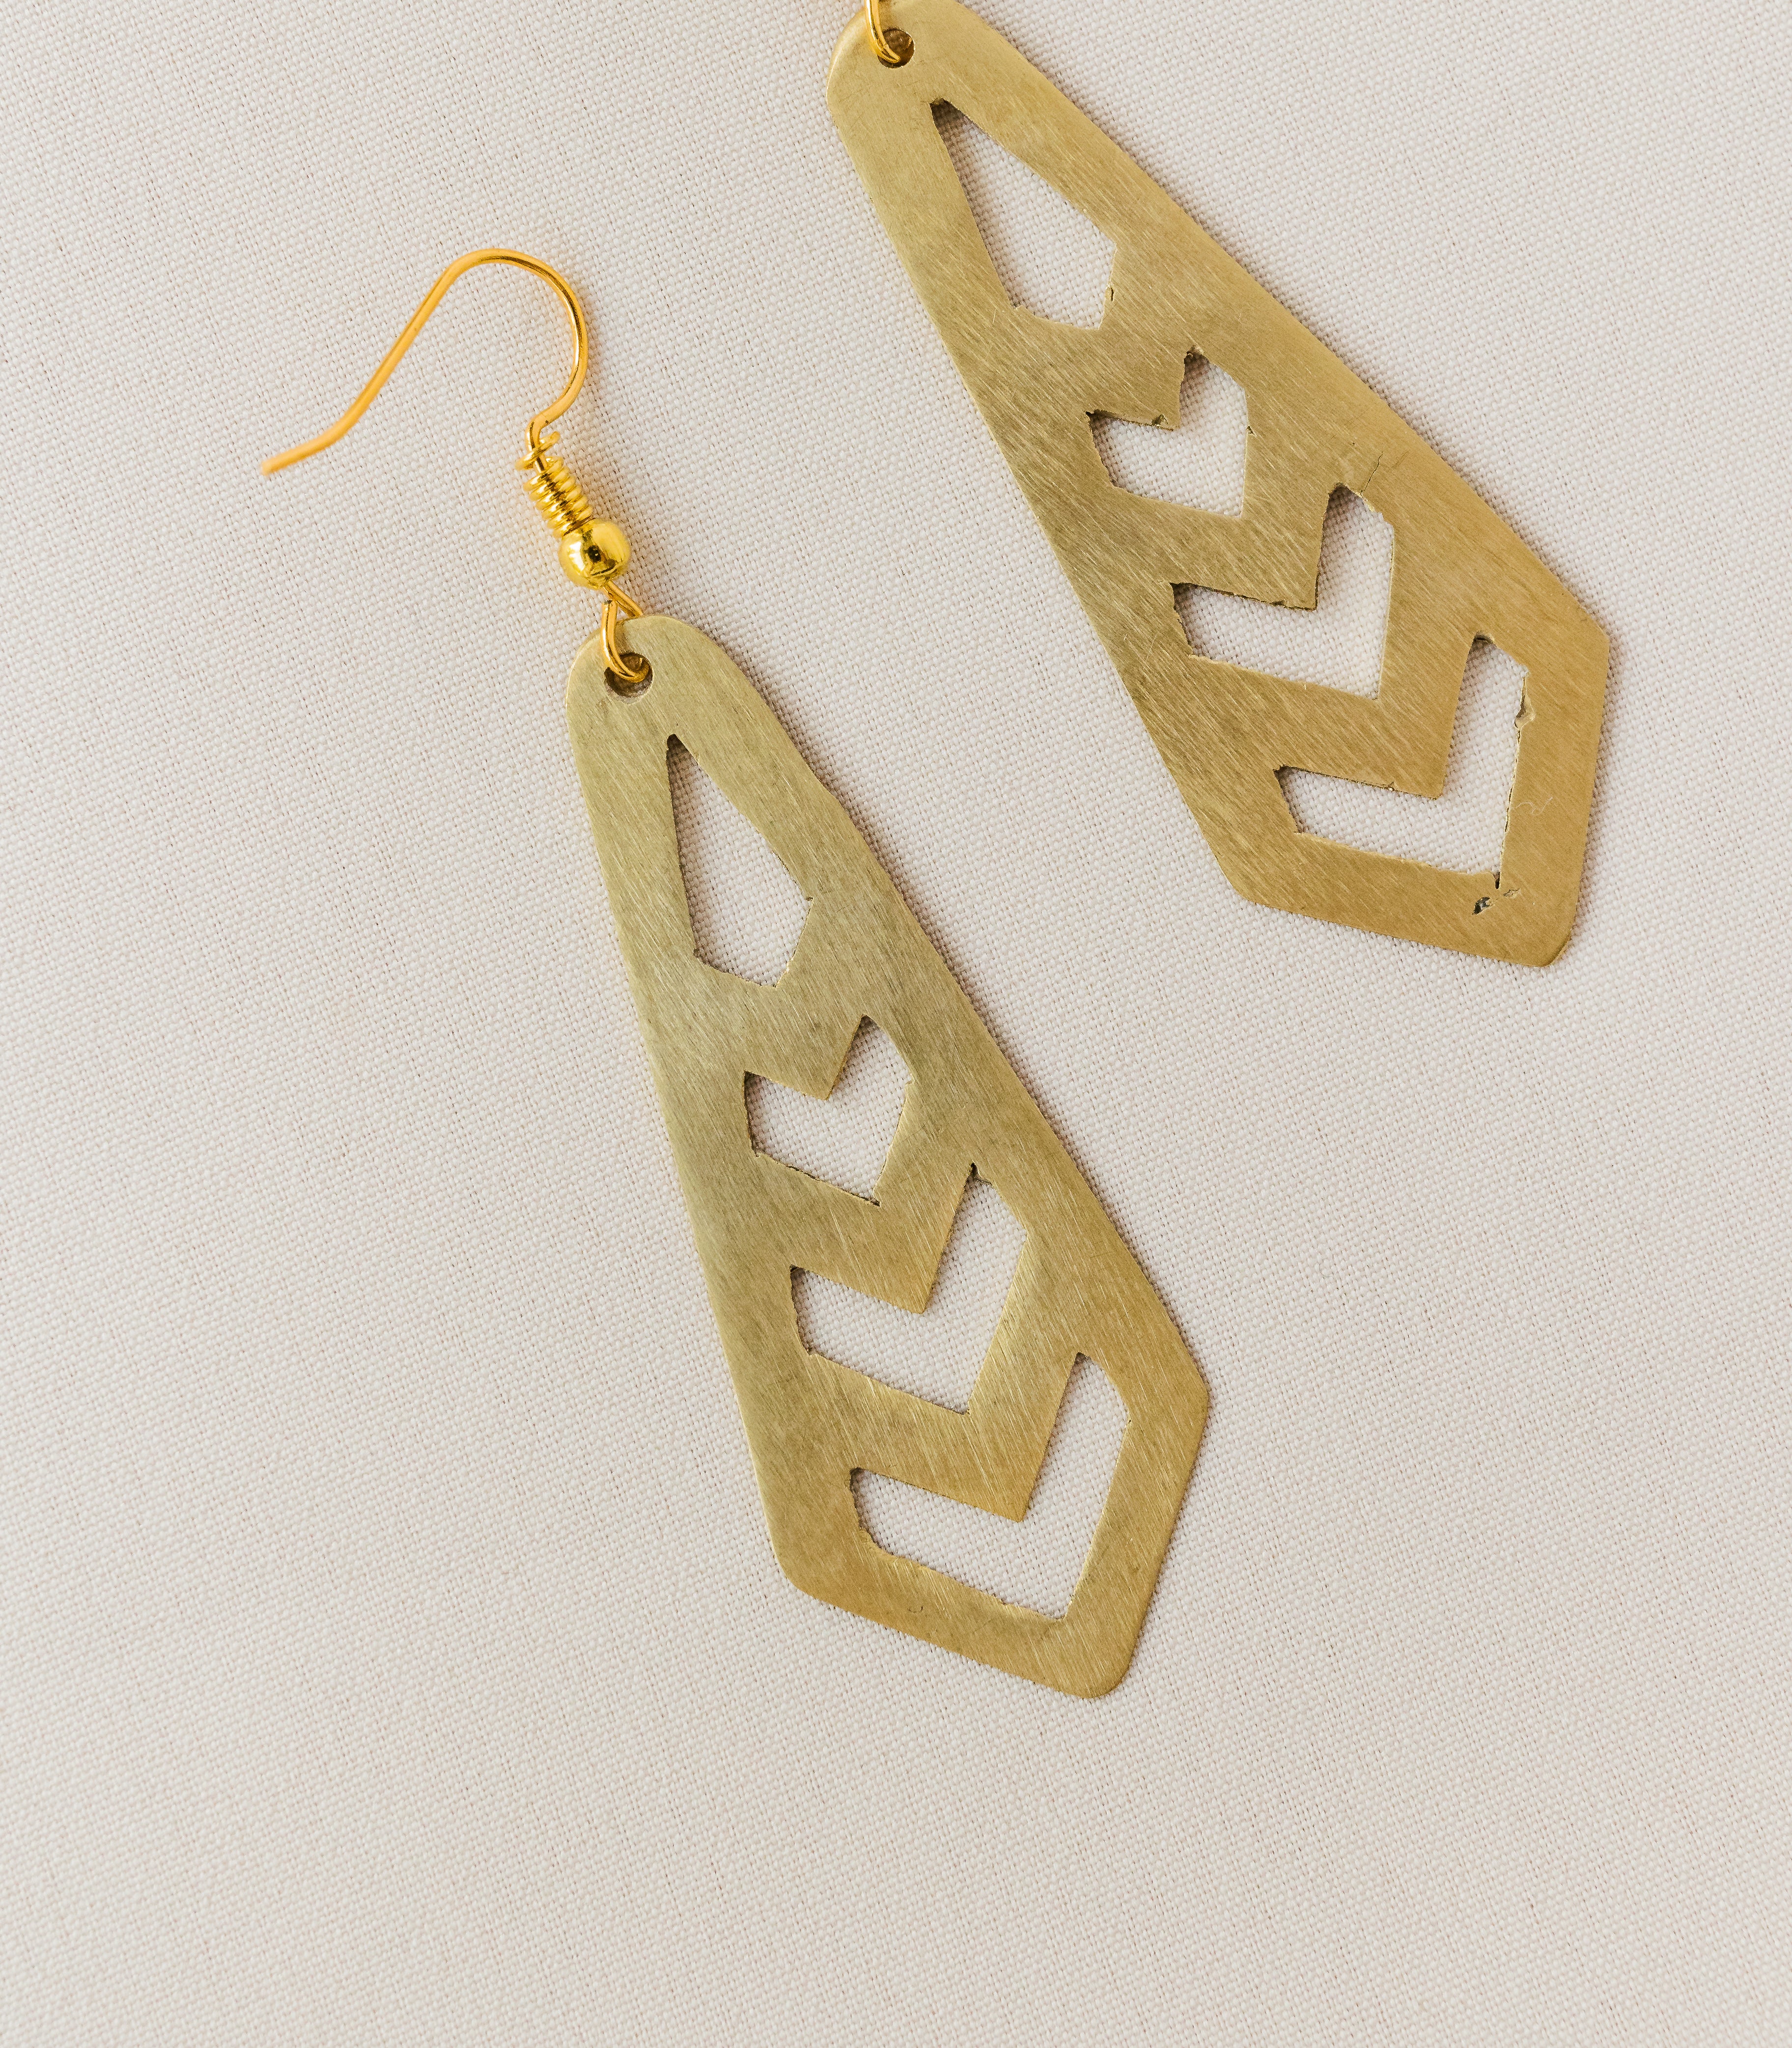 Earrings - Brass & bone/cowhorn spike – Shop with a Mission